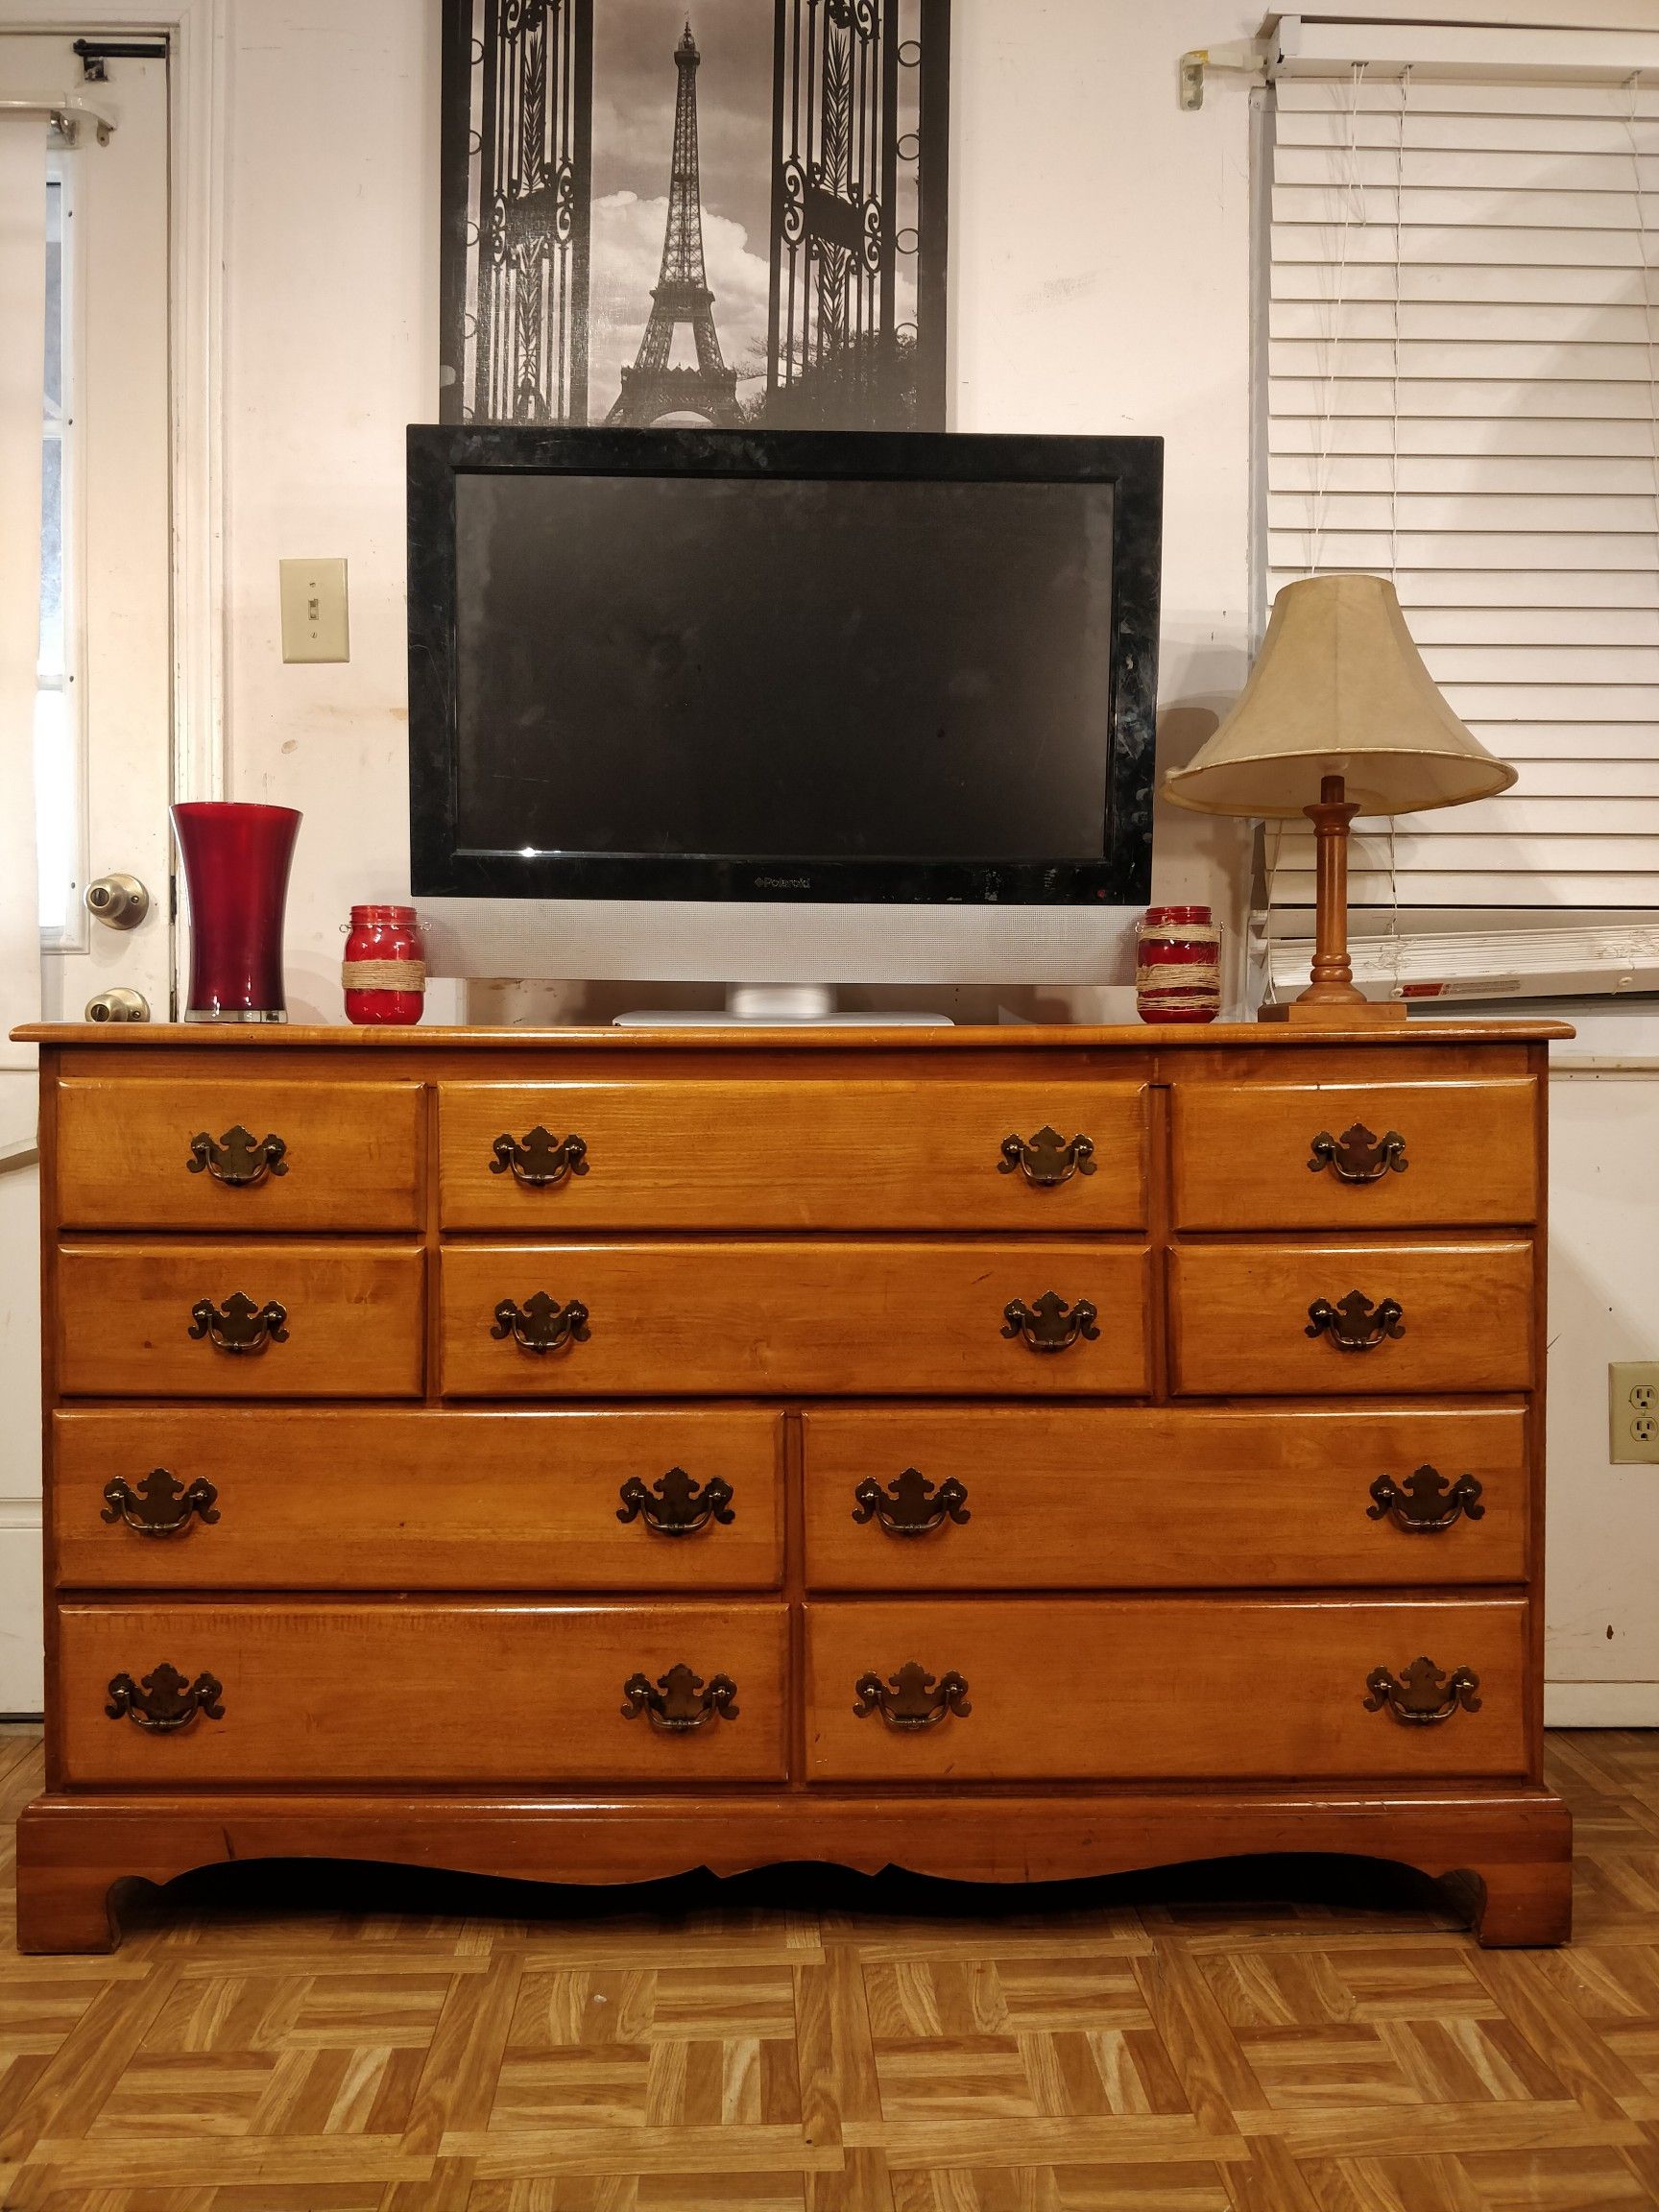 Nice solid wood long dresser with big drawers in good condition, all drawers working well dovetail drawers. L56"*W19"*H33.5"